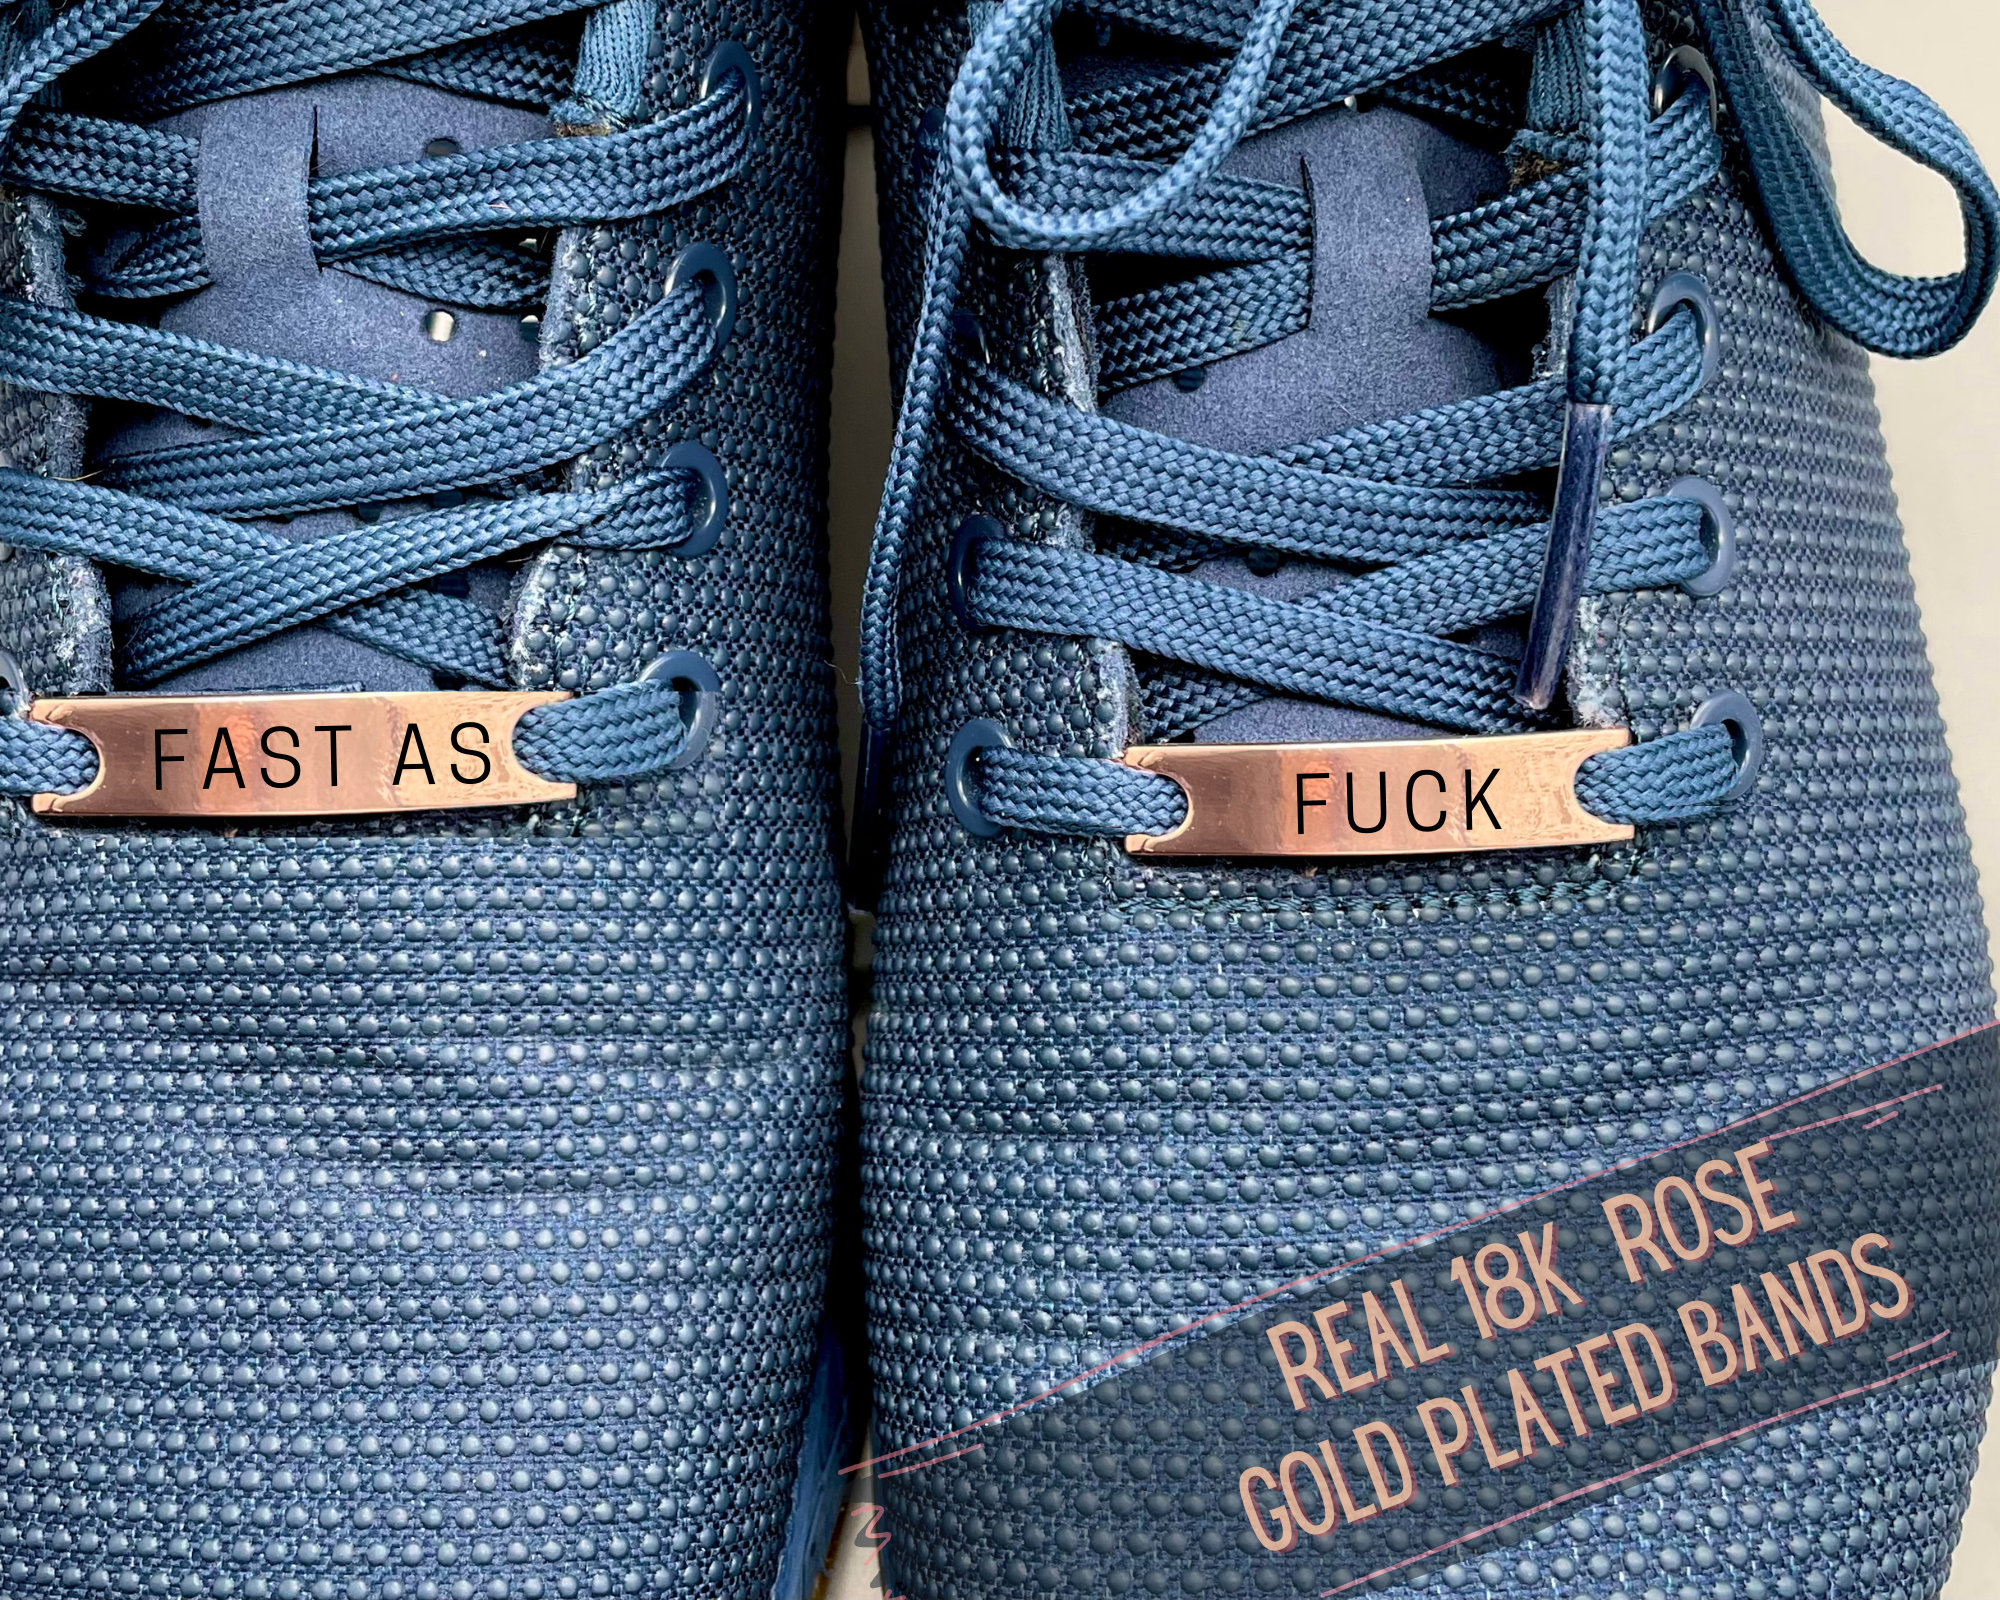 Fast as Fuck or Rose Gold Custom-made Real Gold - Etsy